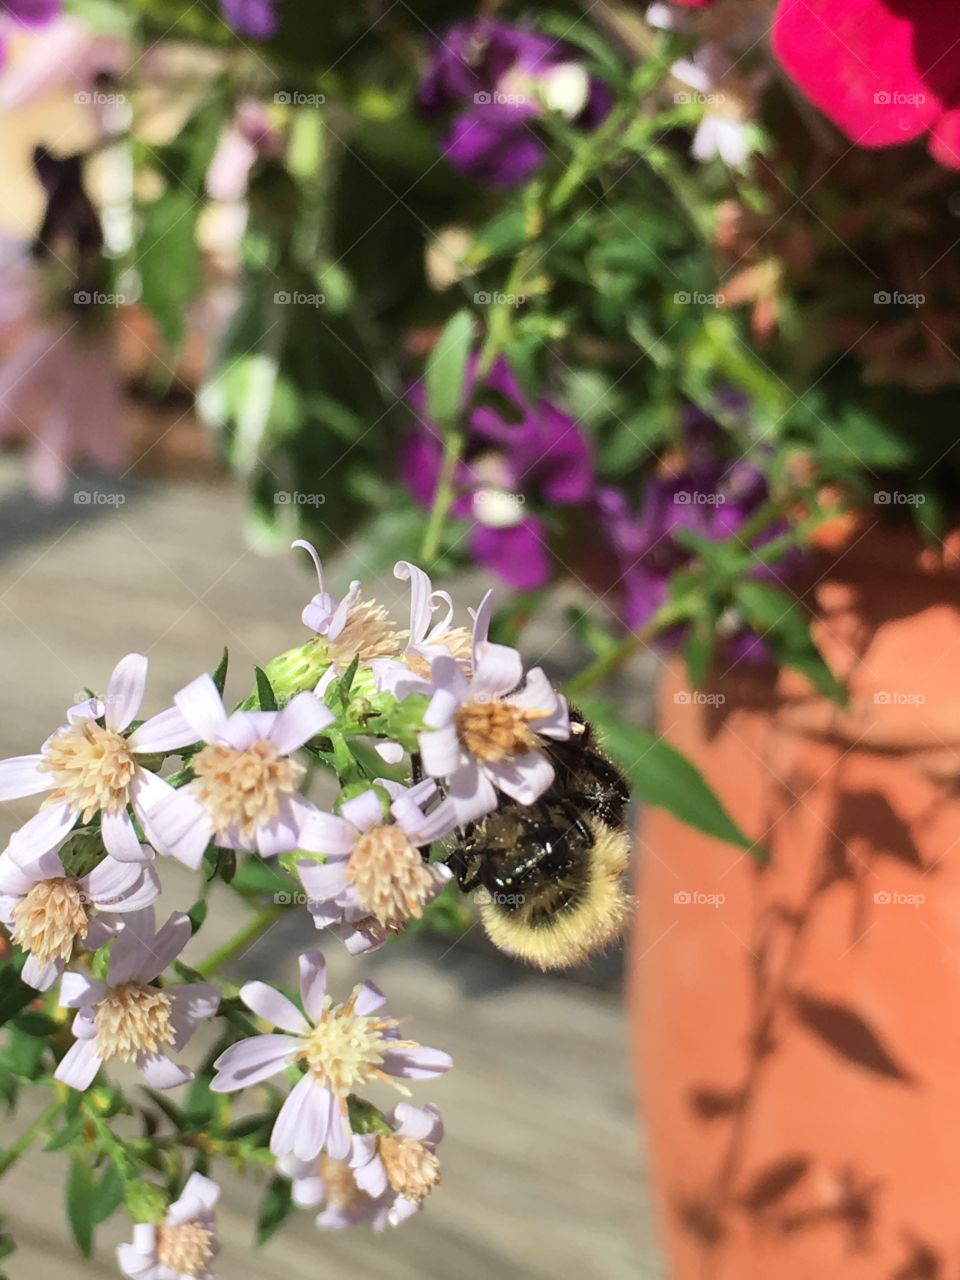 Bees are loving the extended summer temperatures